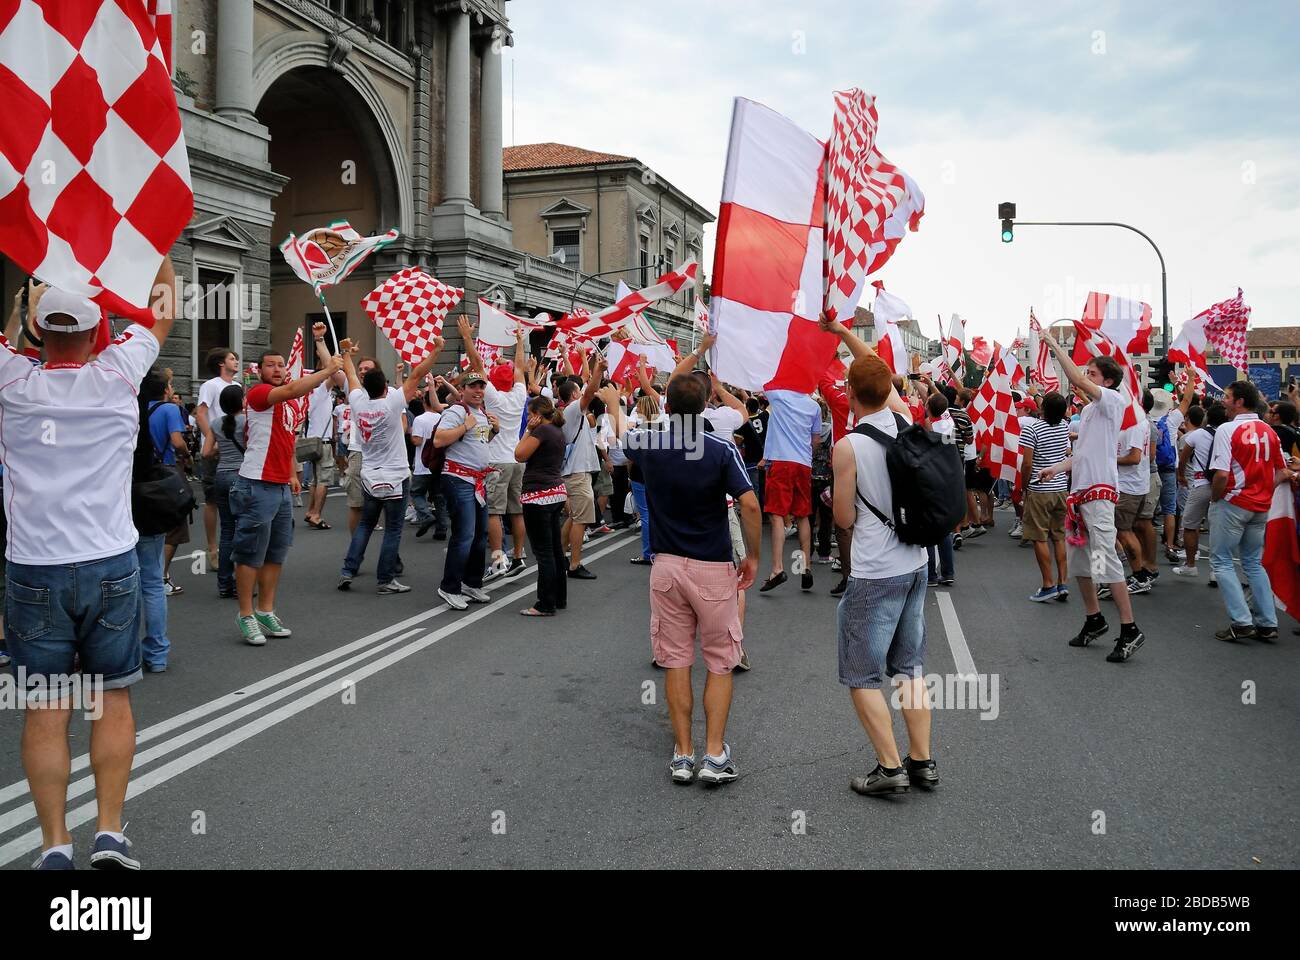 Padua, Italy, June 21, 2009.  Fans and ultras celebrate the Padova Football Club is promoted to Serie B. Stock Photo